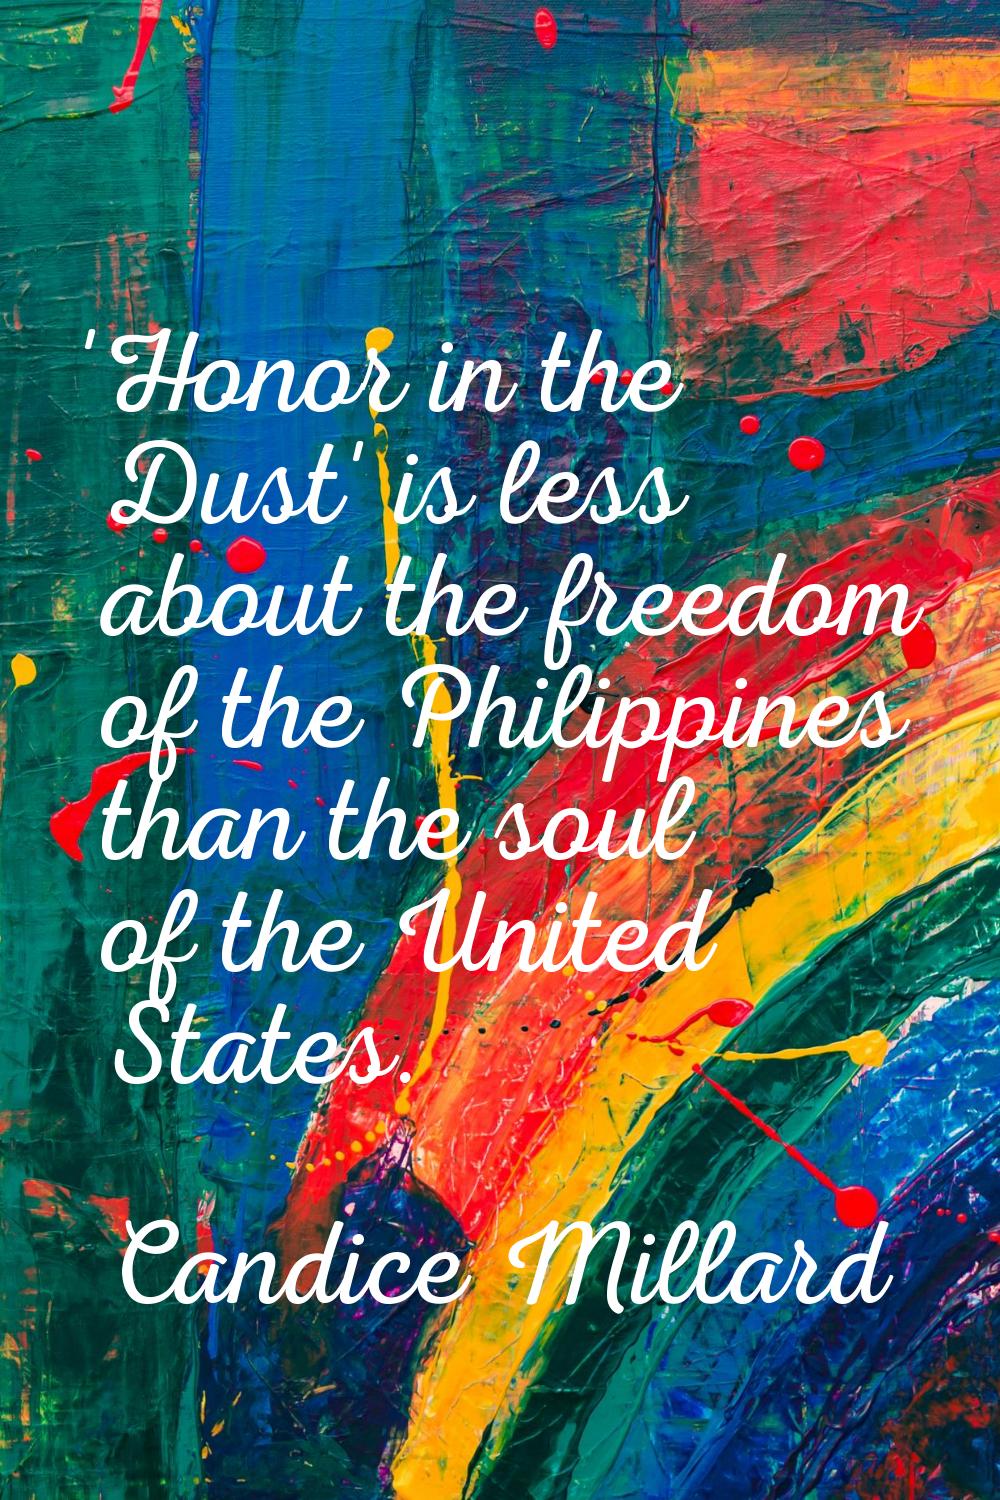 'Honor in the Dust' is less about the freedom of the Philippines than the soul of the United States